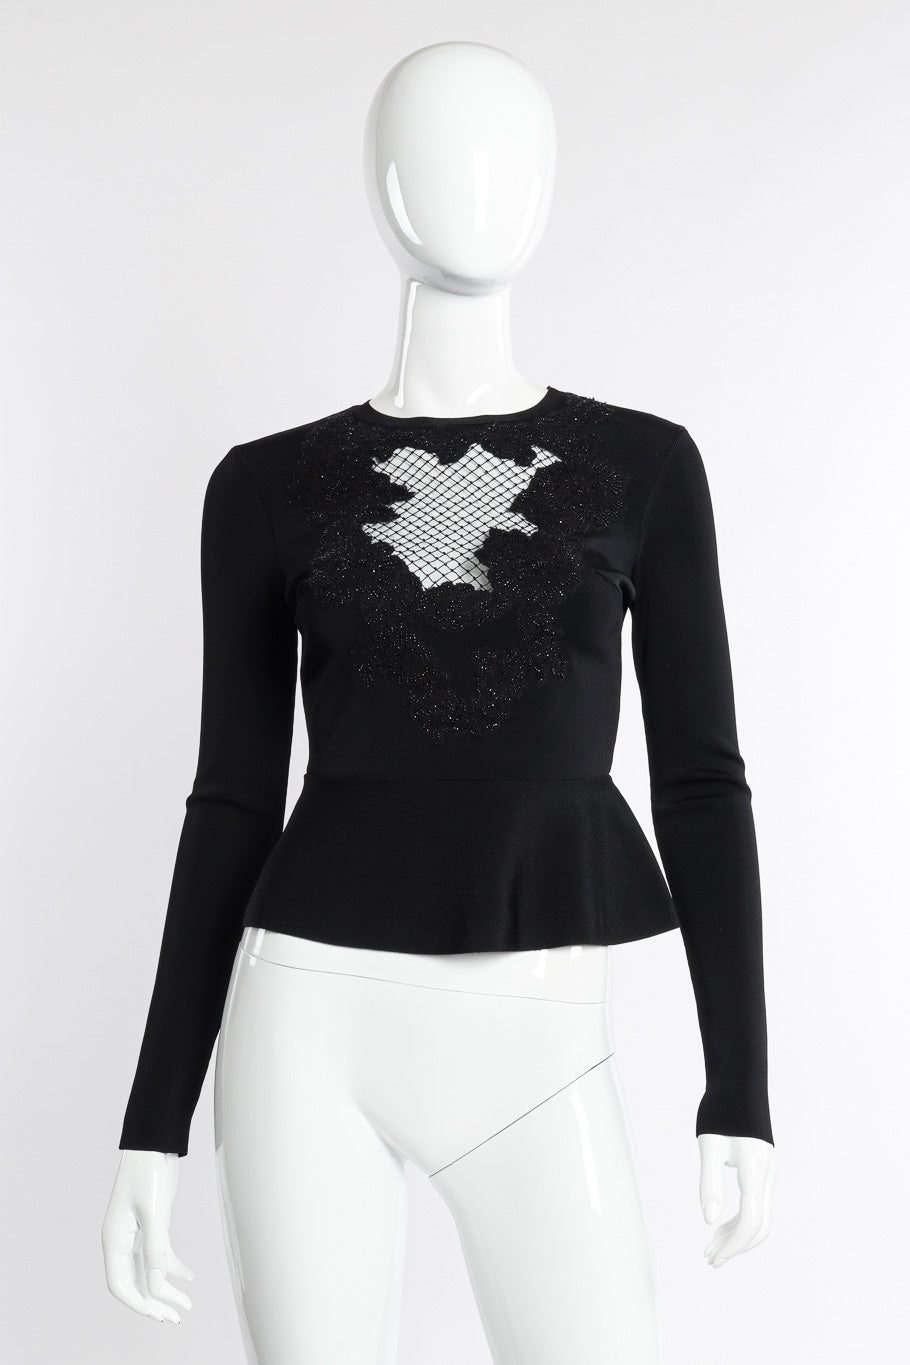 Valentino Beaded Fishnet Knit Top front on mannequin @recessla